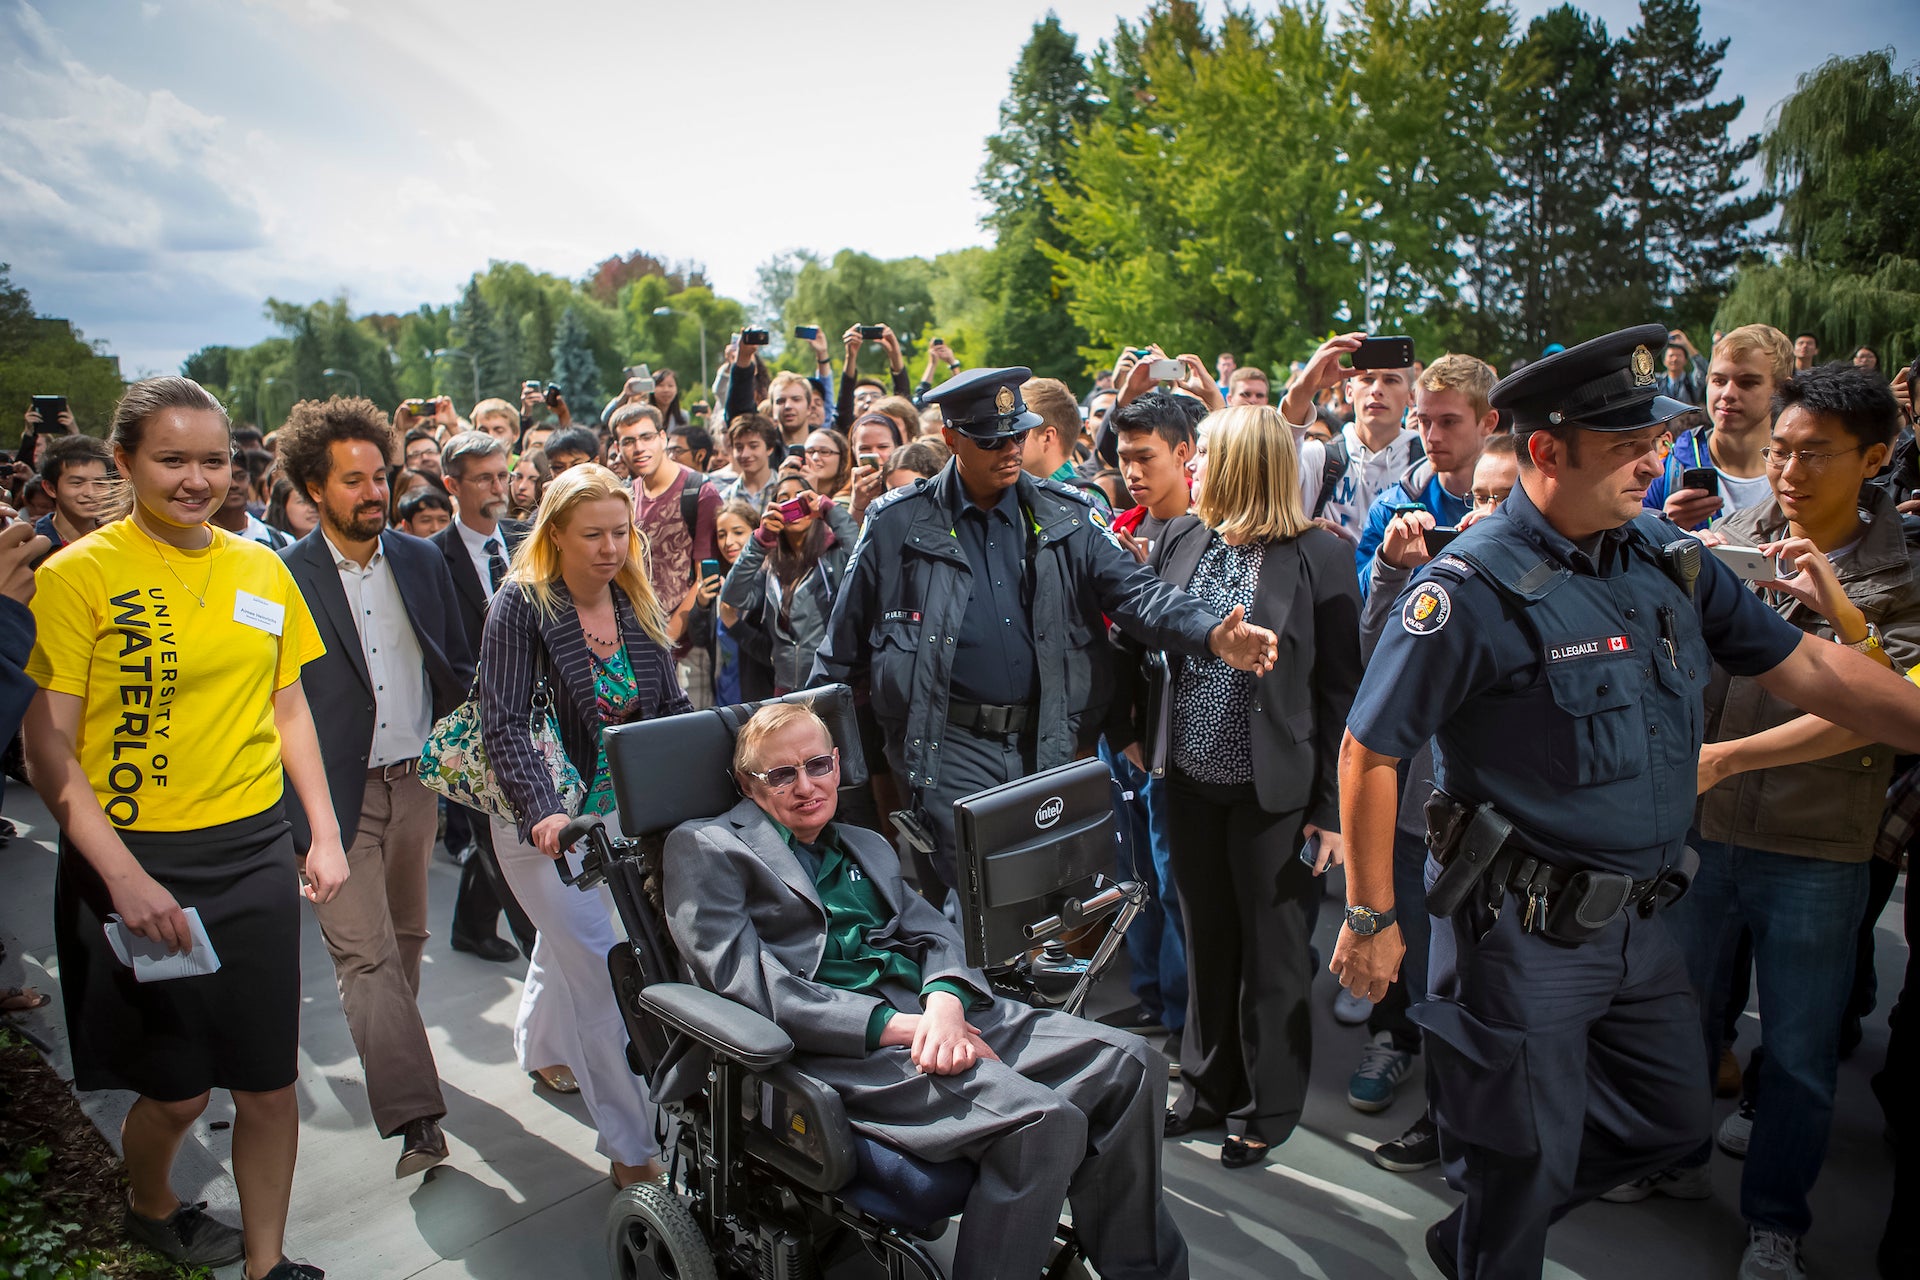 Stephen Hawking being greeted by crowds in 2012.